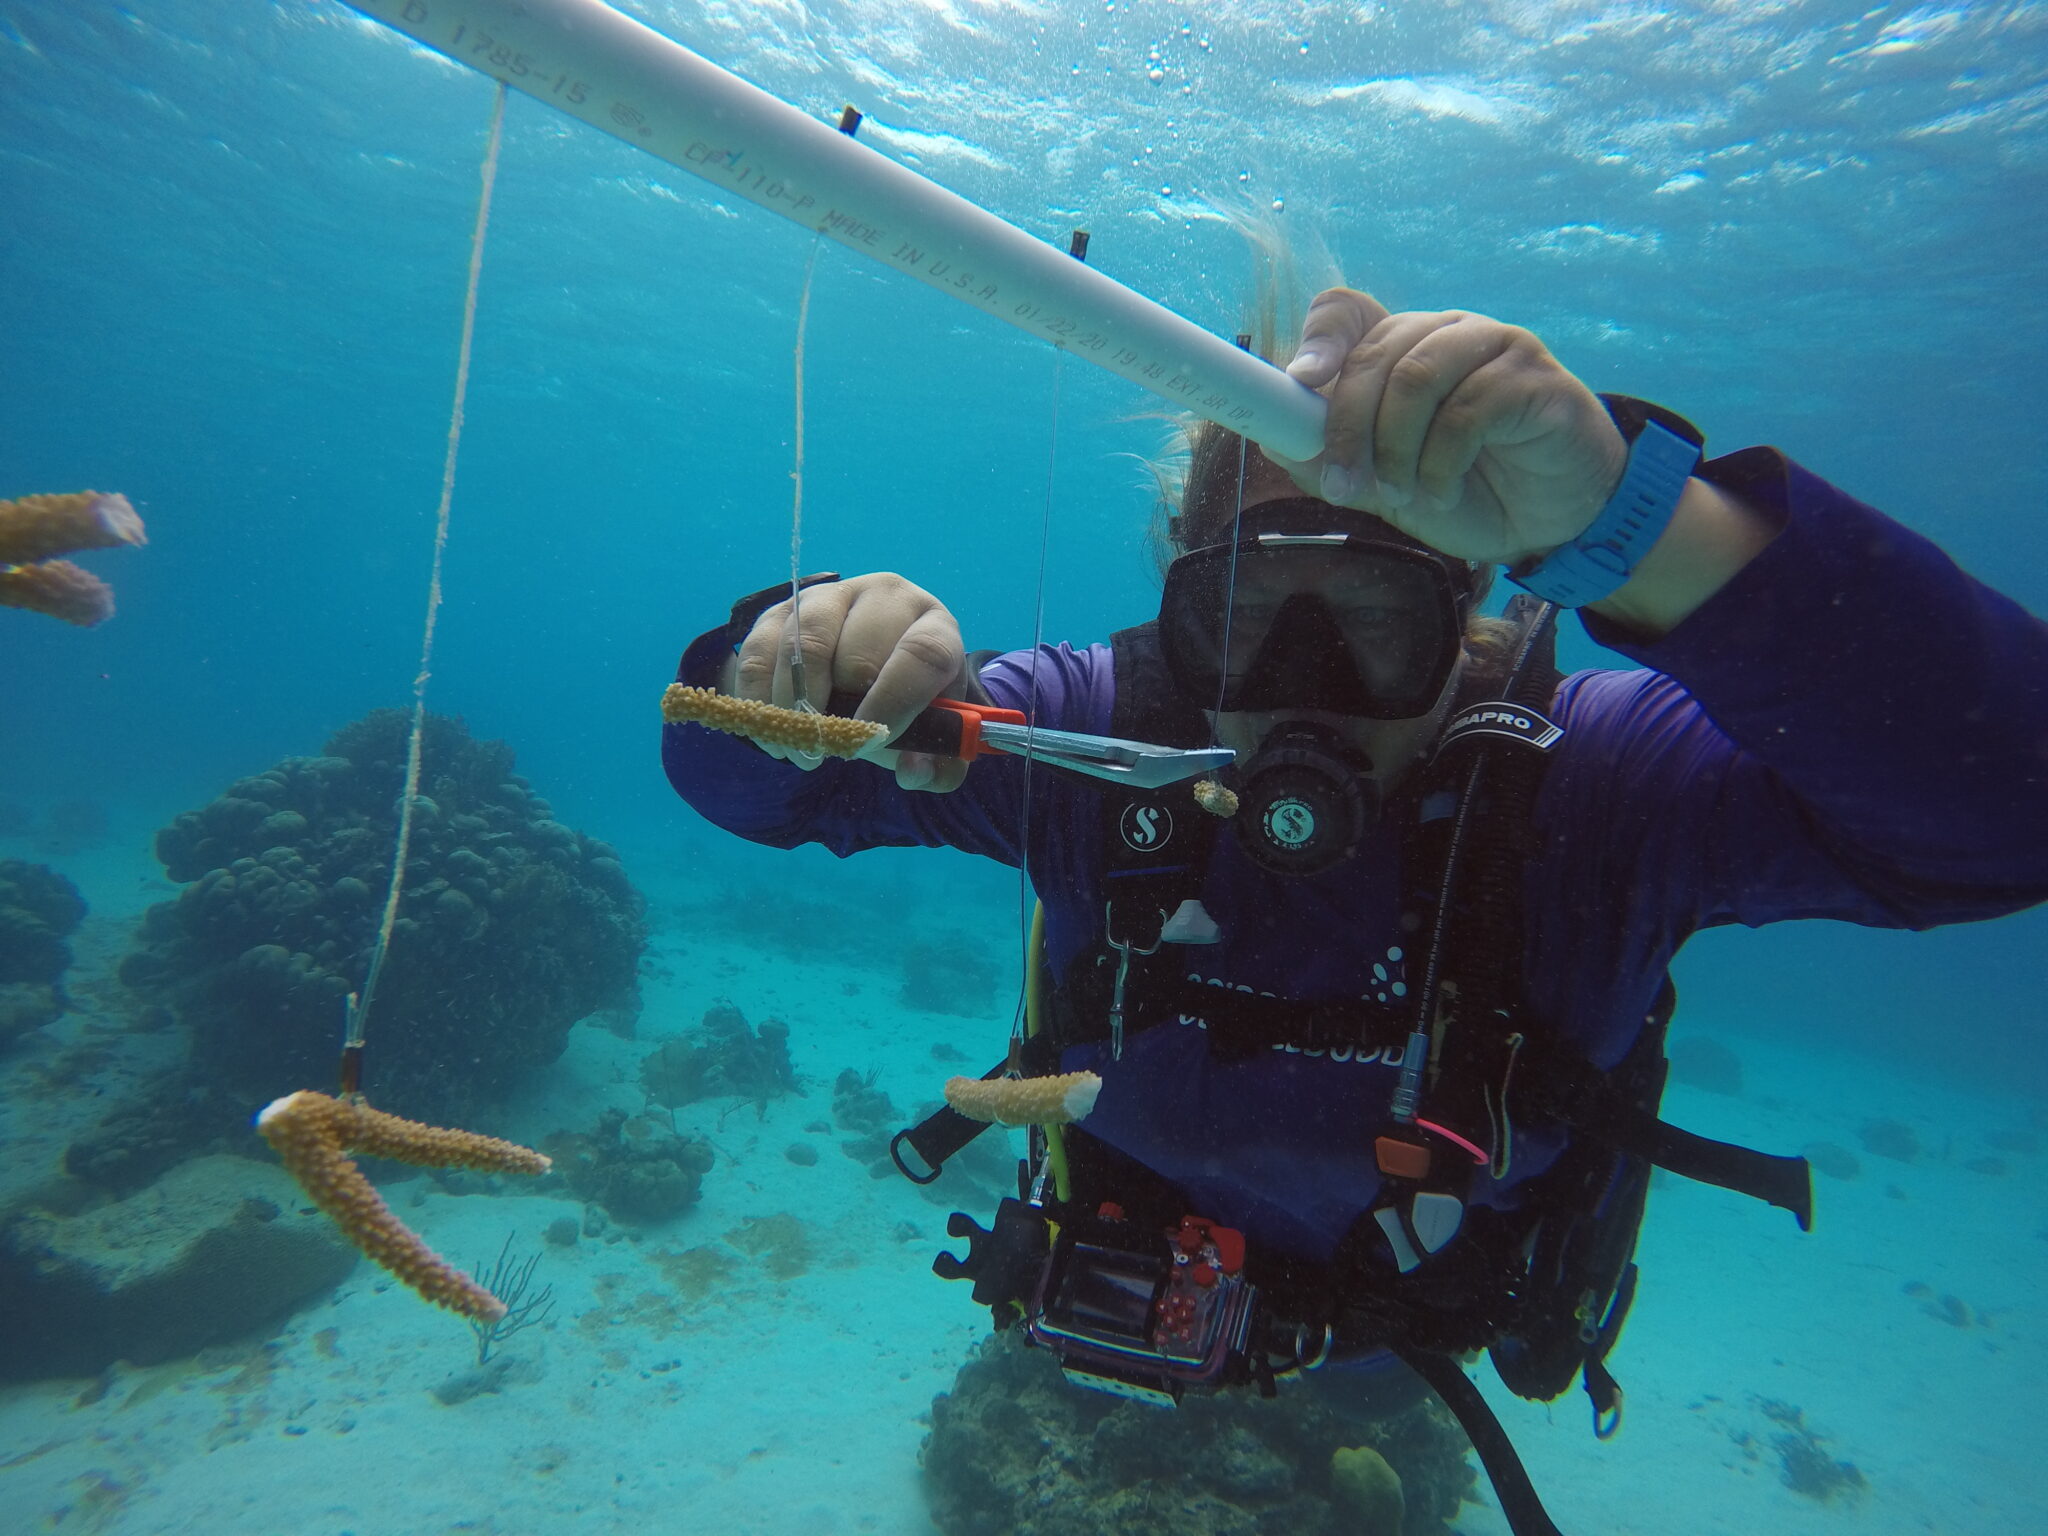 Nicole Danser farms new coral growths underwater in the Caribbean